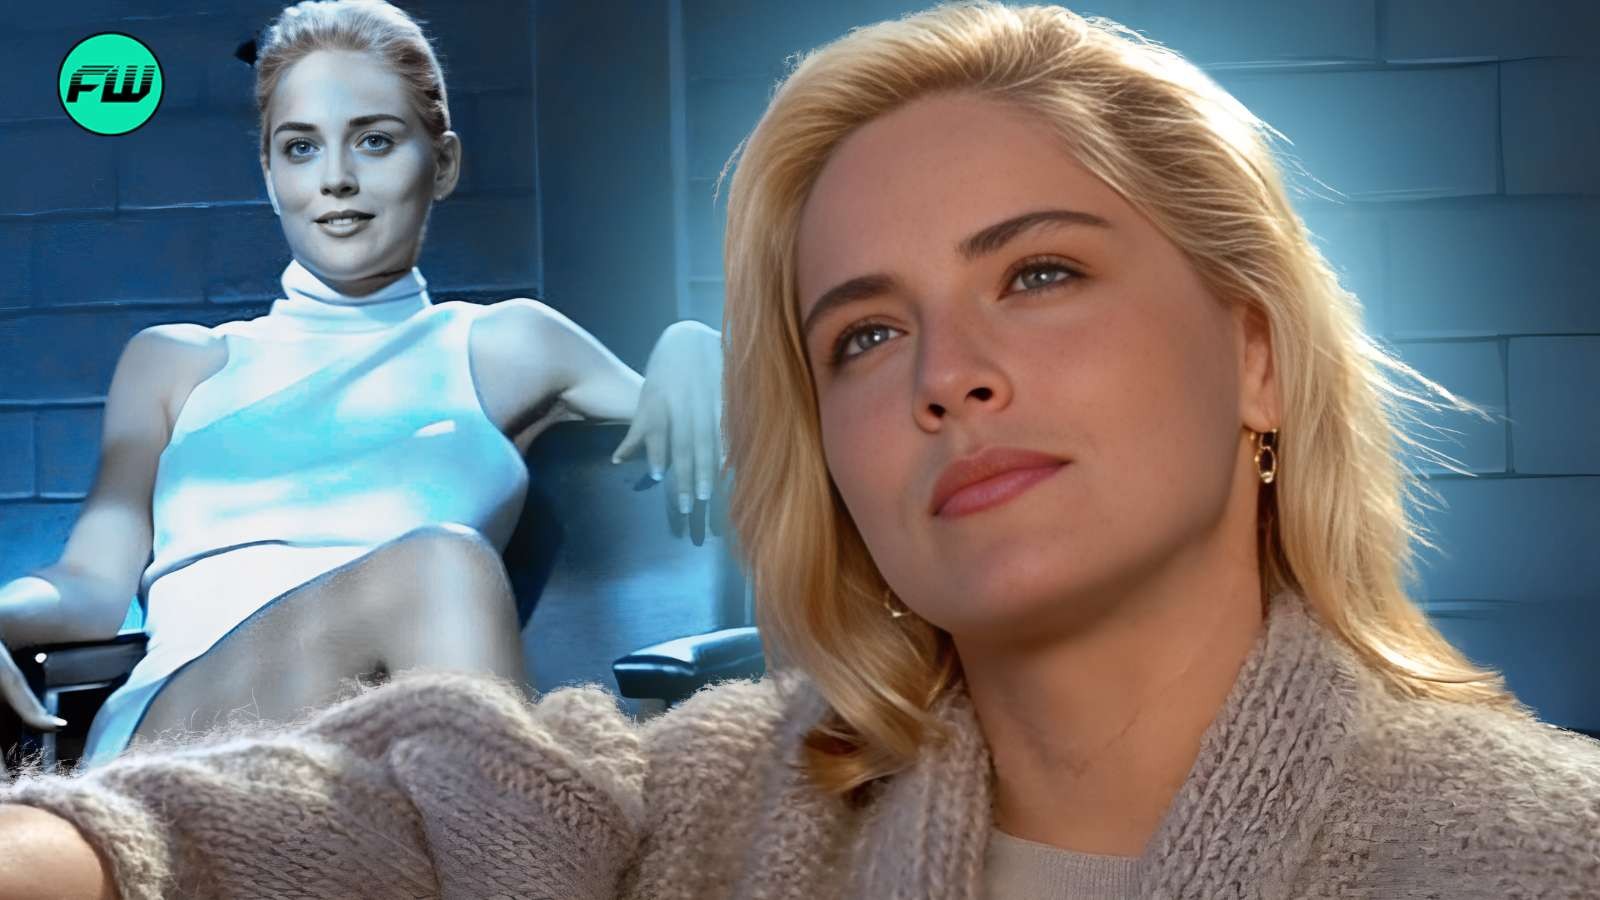 Sharon Stone finds it difficult to let go of her most famous screen personality after 32 years, even though “Basic Instinct” almost ruined her life